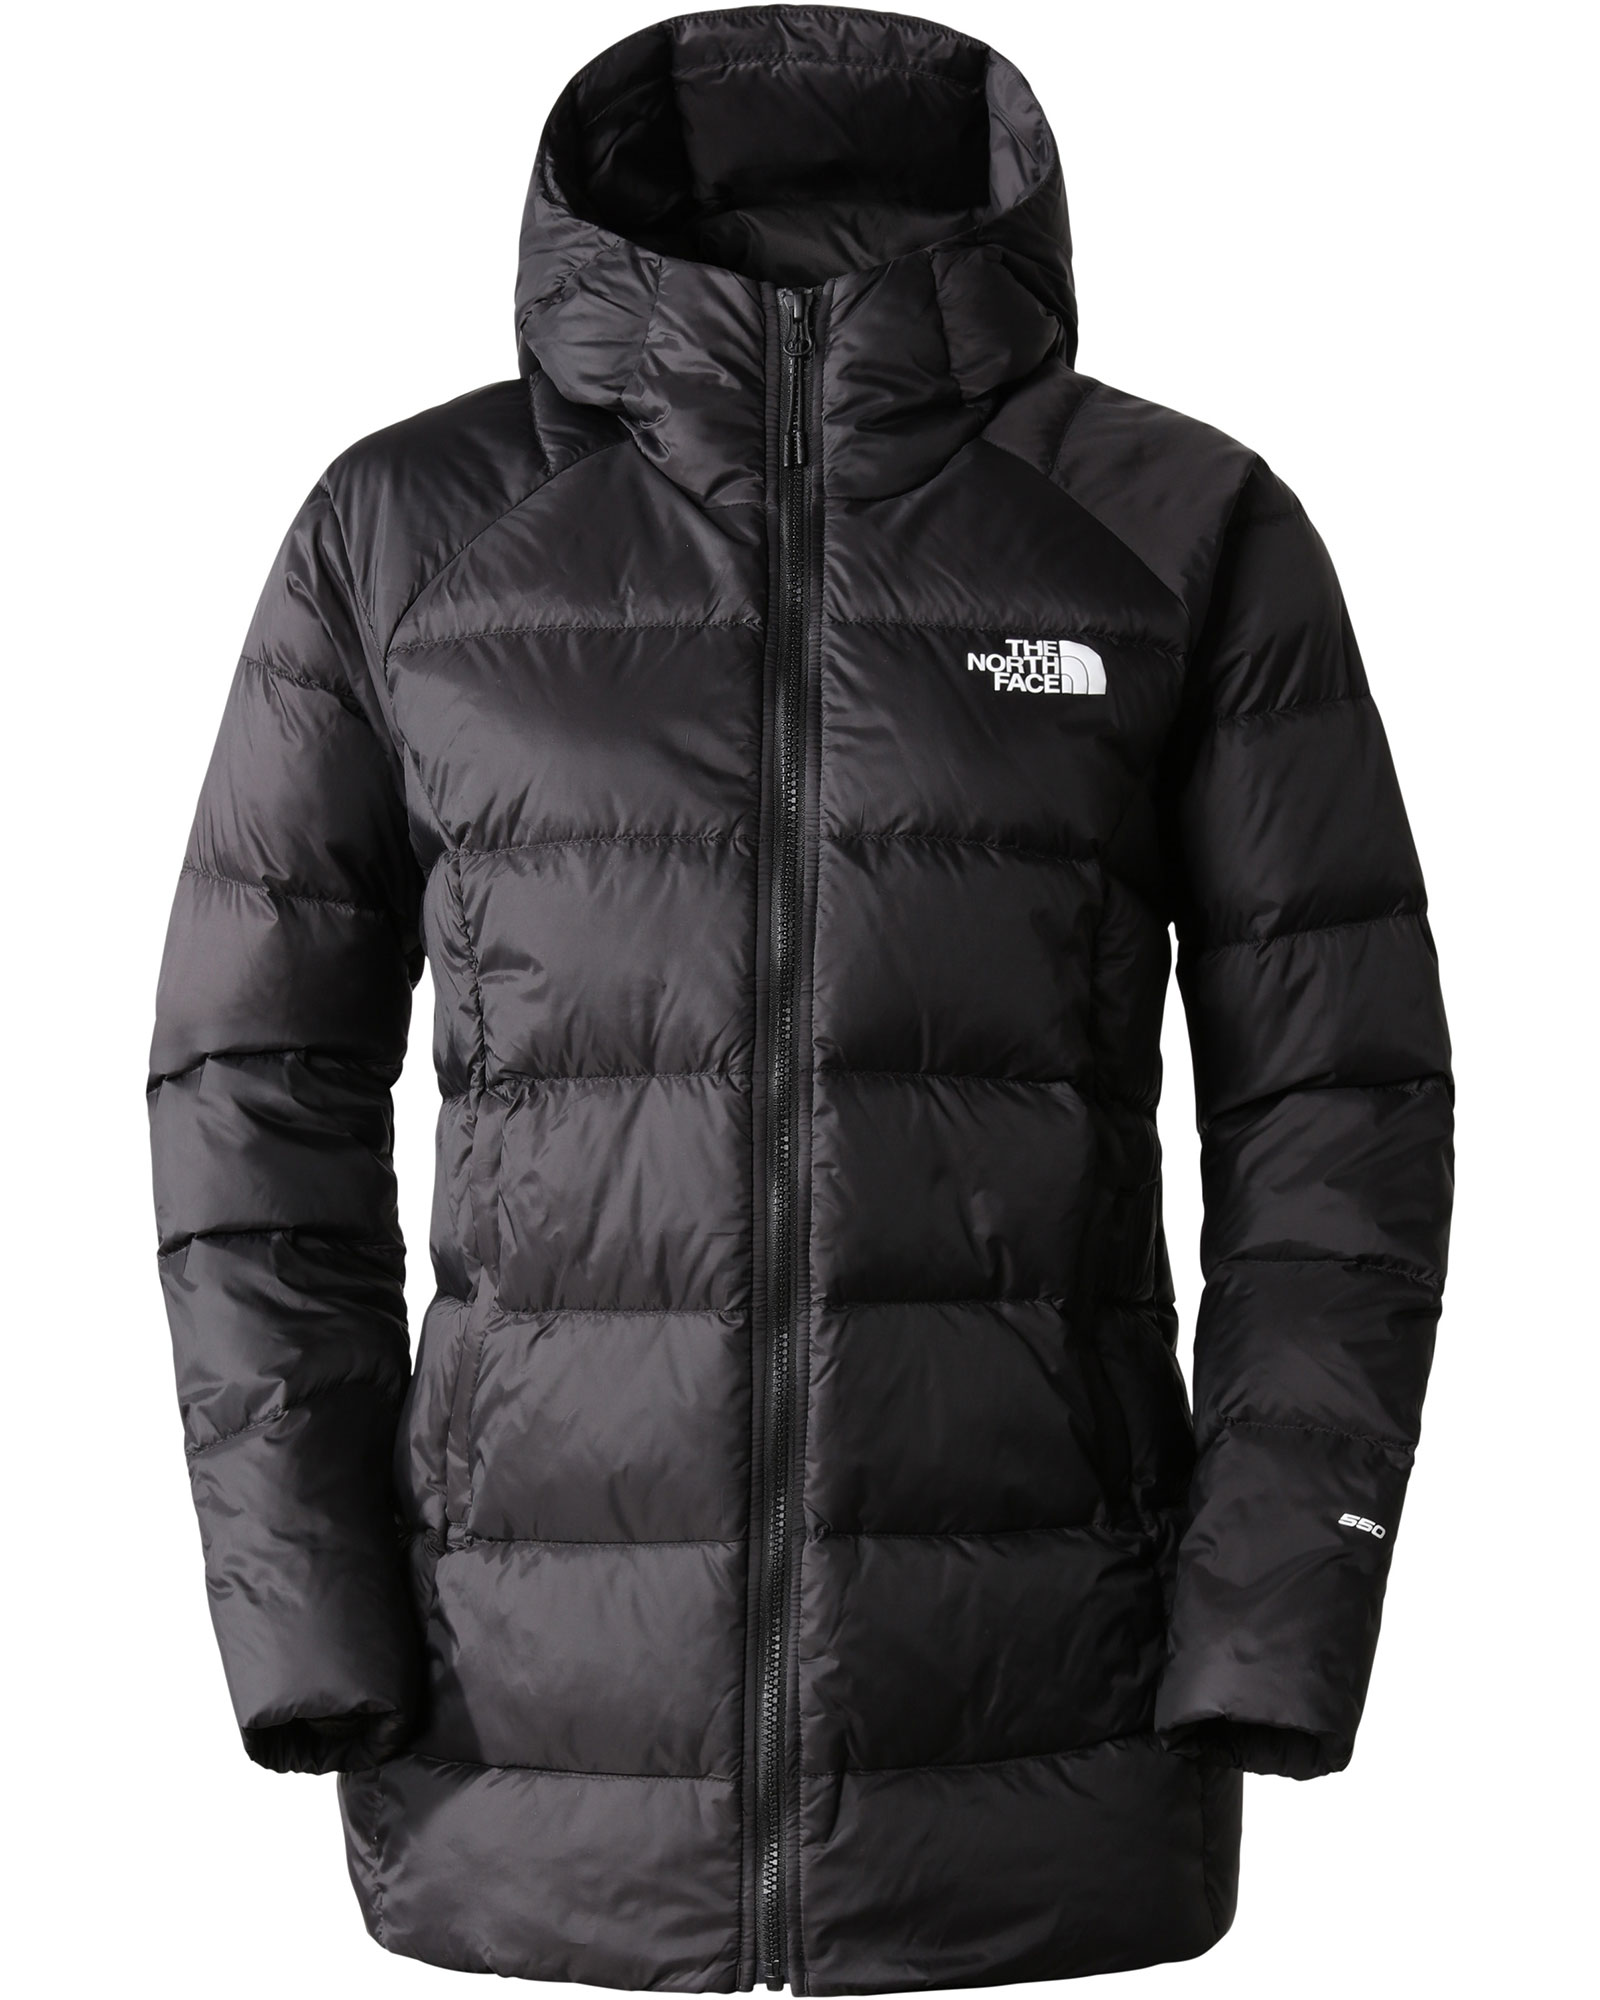 The North Face Hyalite Women’s Down Parka Jacket - TNF Black XS